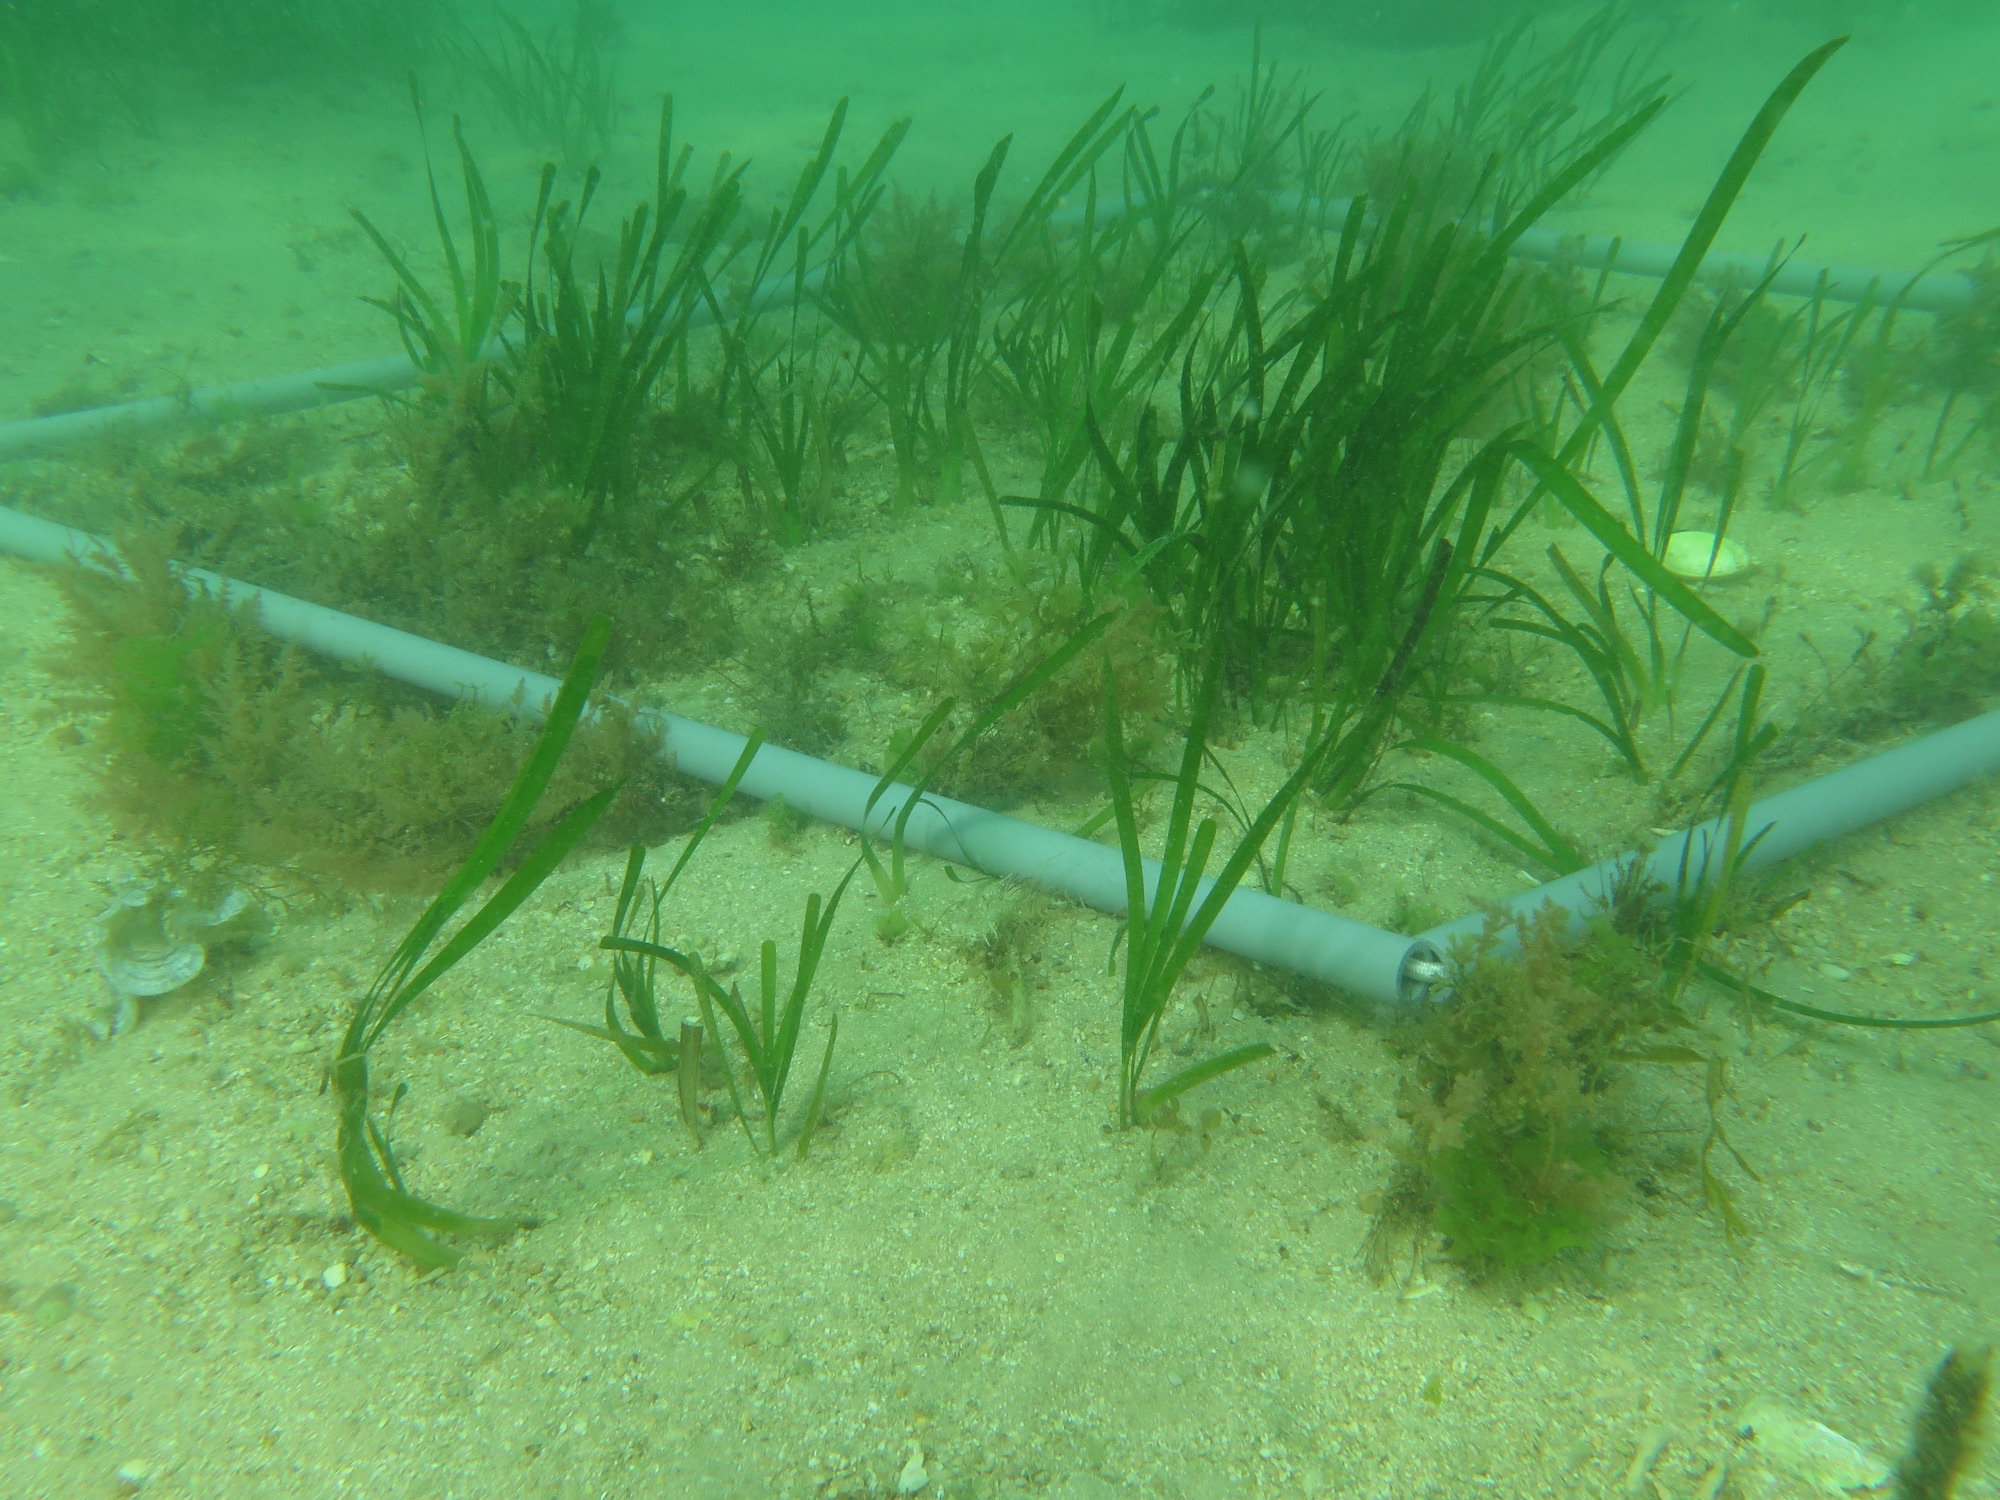 Seagrass Ecology